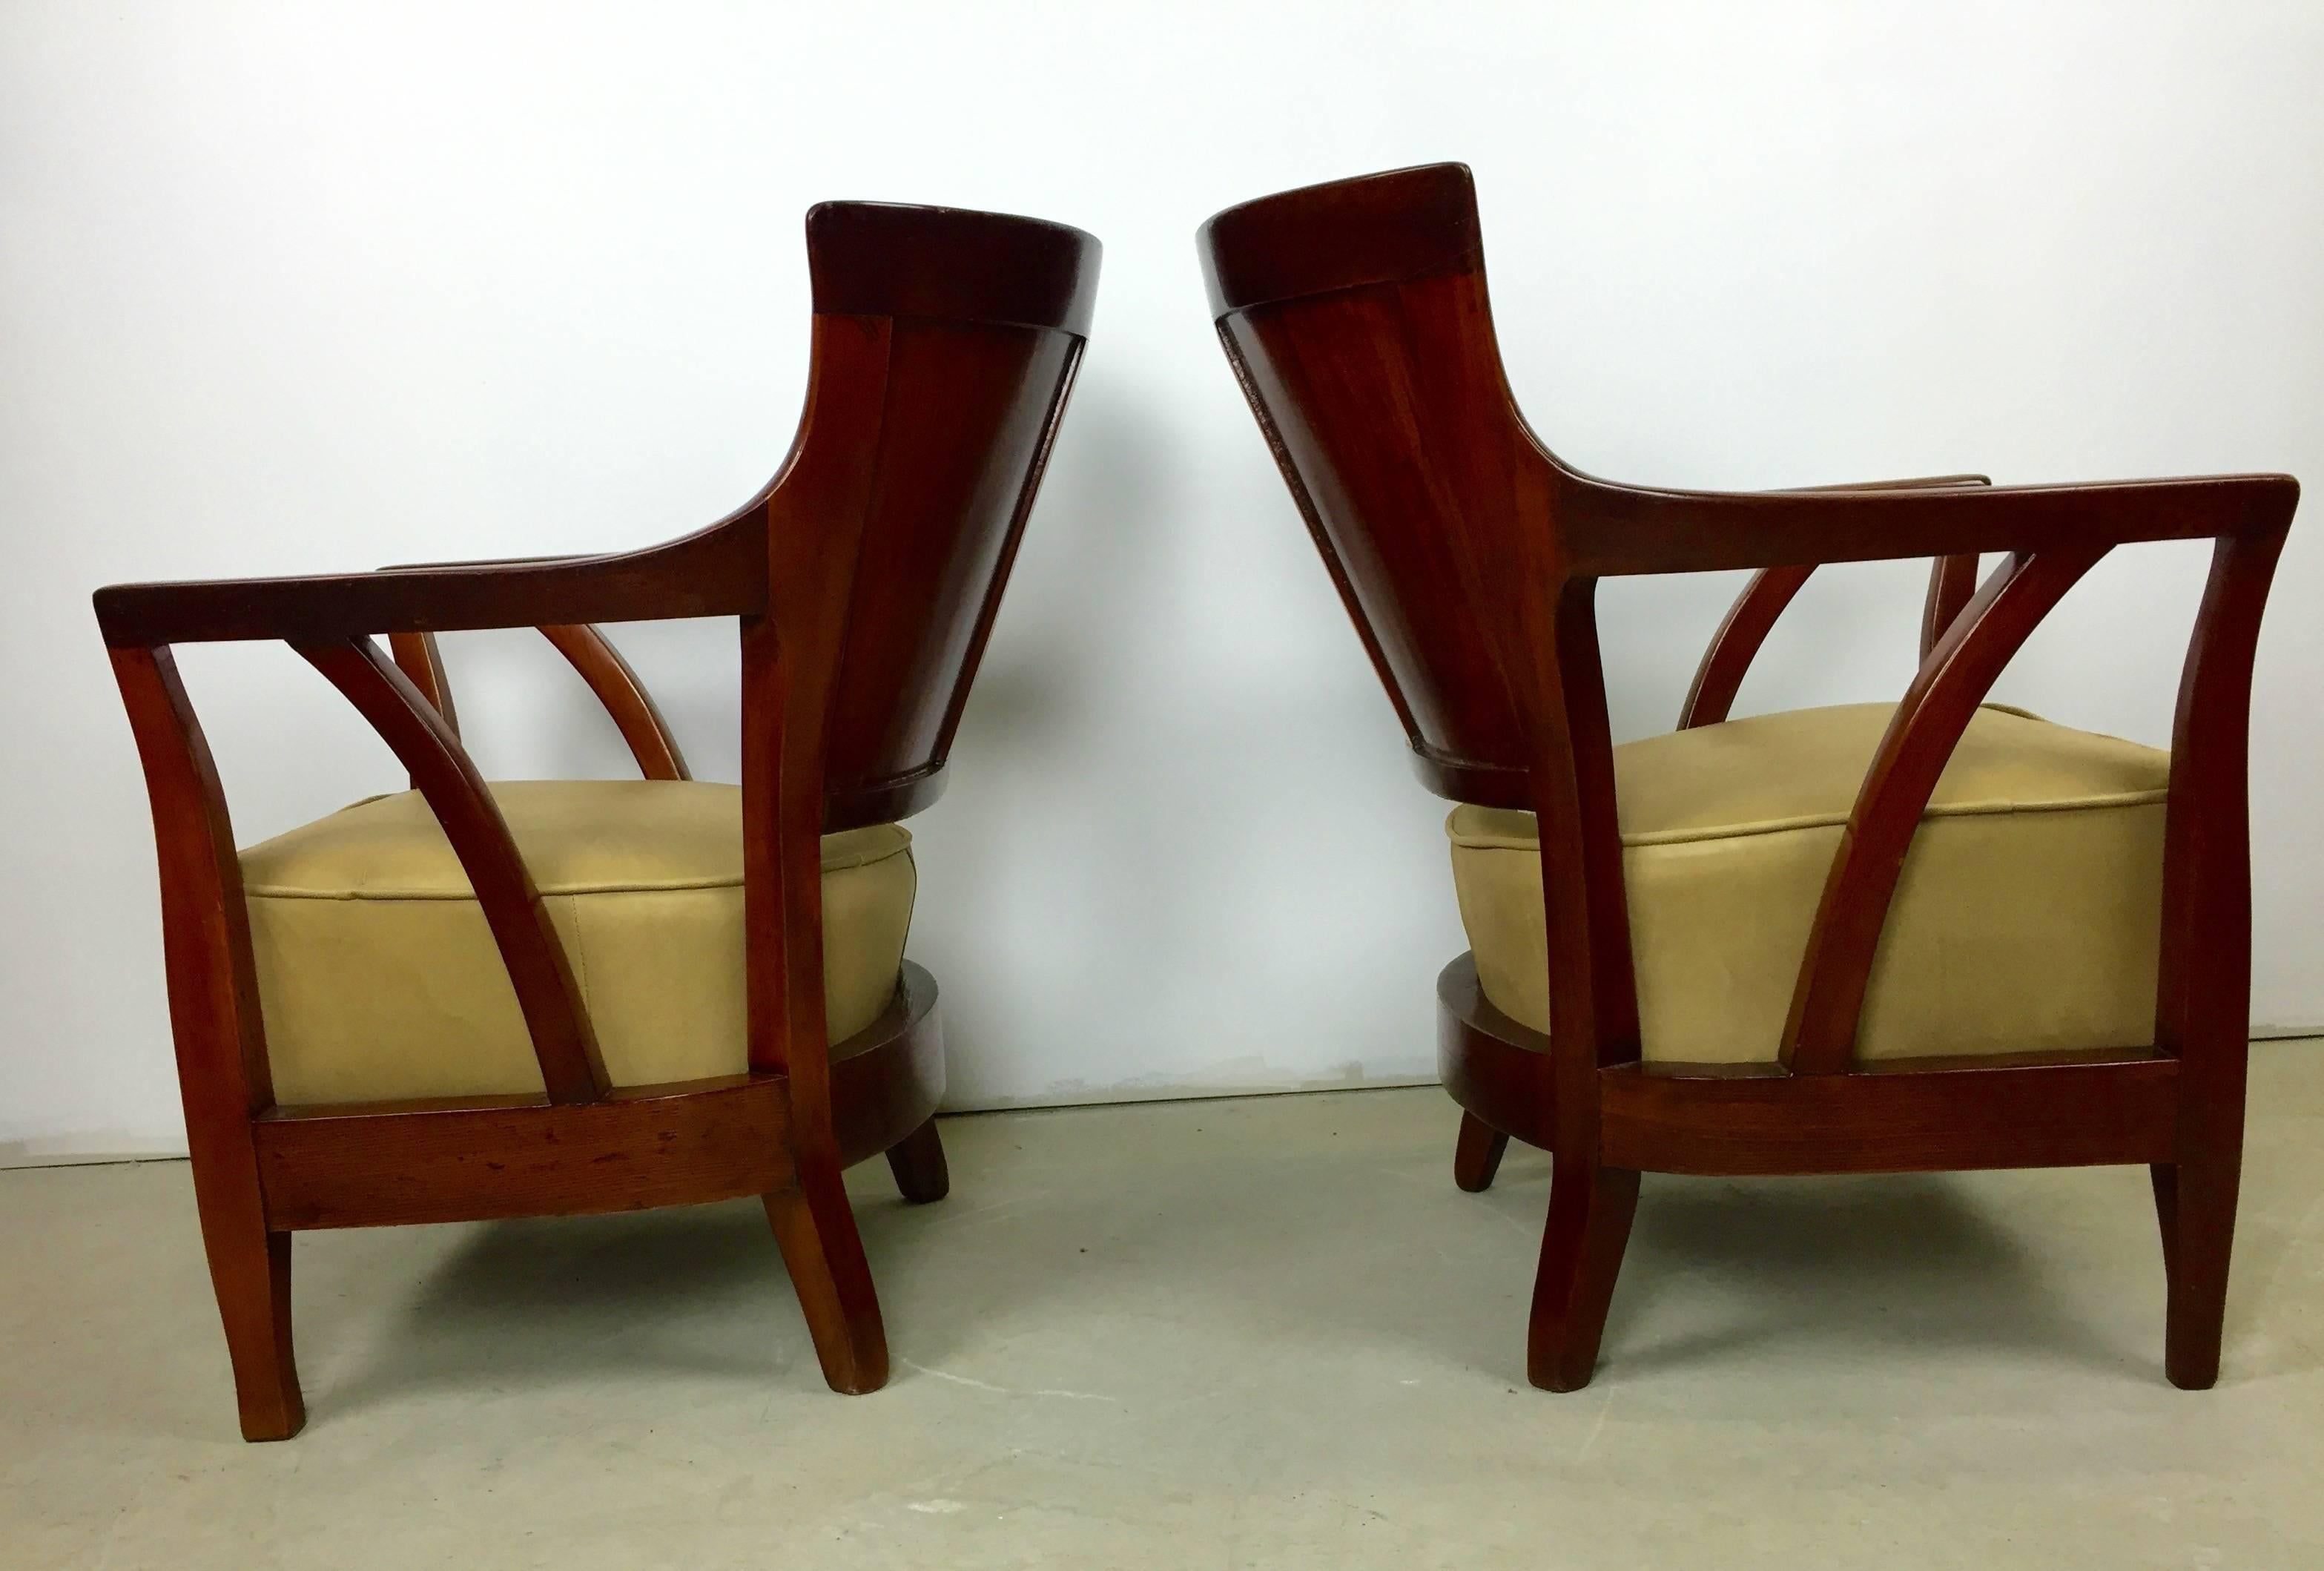 A rare pair of club chairs from the Viennese Secession. Walnut and pearwood frames freshly lacquered and reupholstered in beautiful buttercream leather. A stunning pair of chairs that we are glad to have brought back to life and proud to bring them